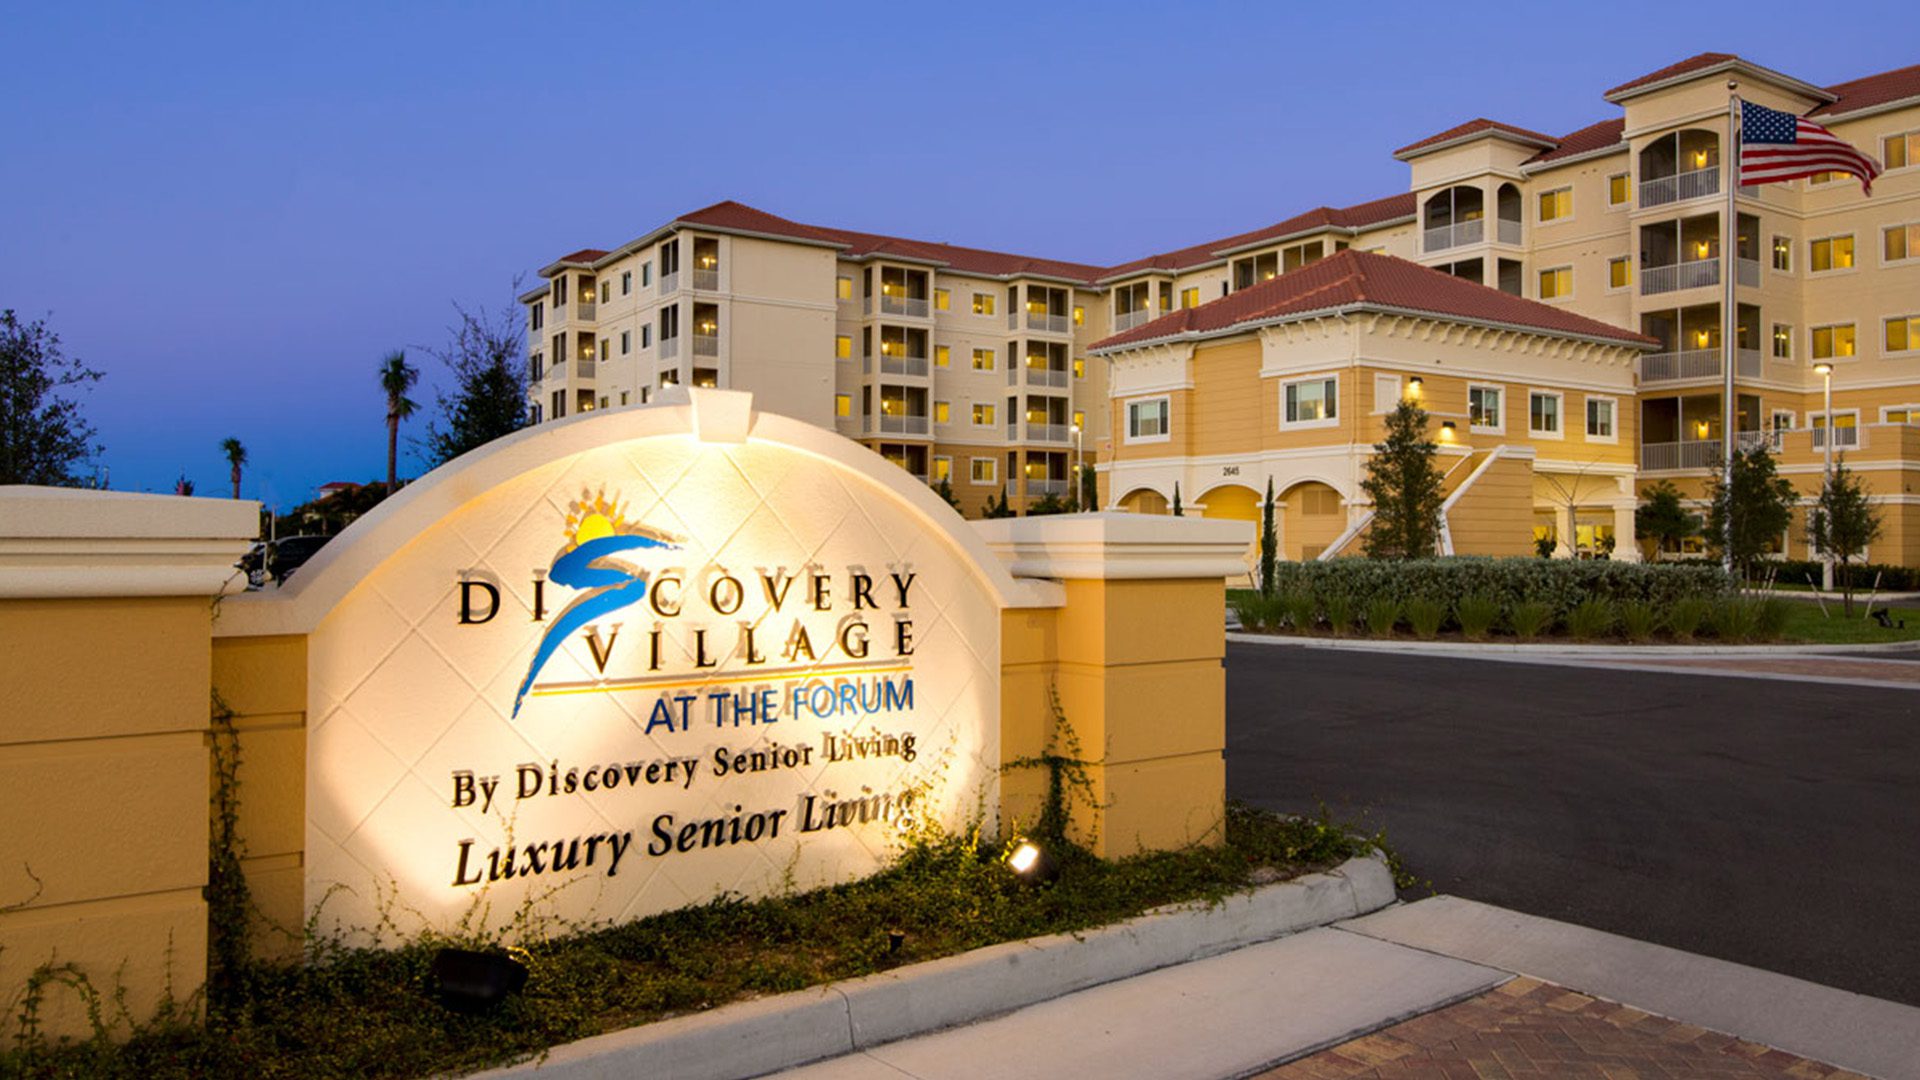 Discovery Village at the Forum